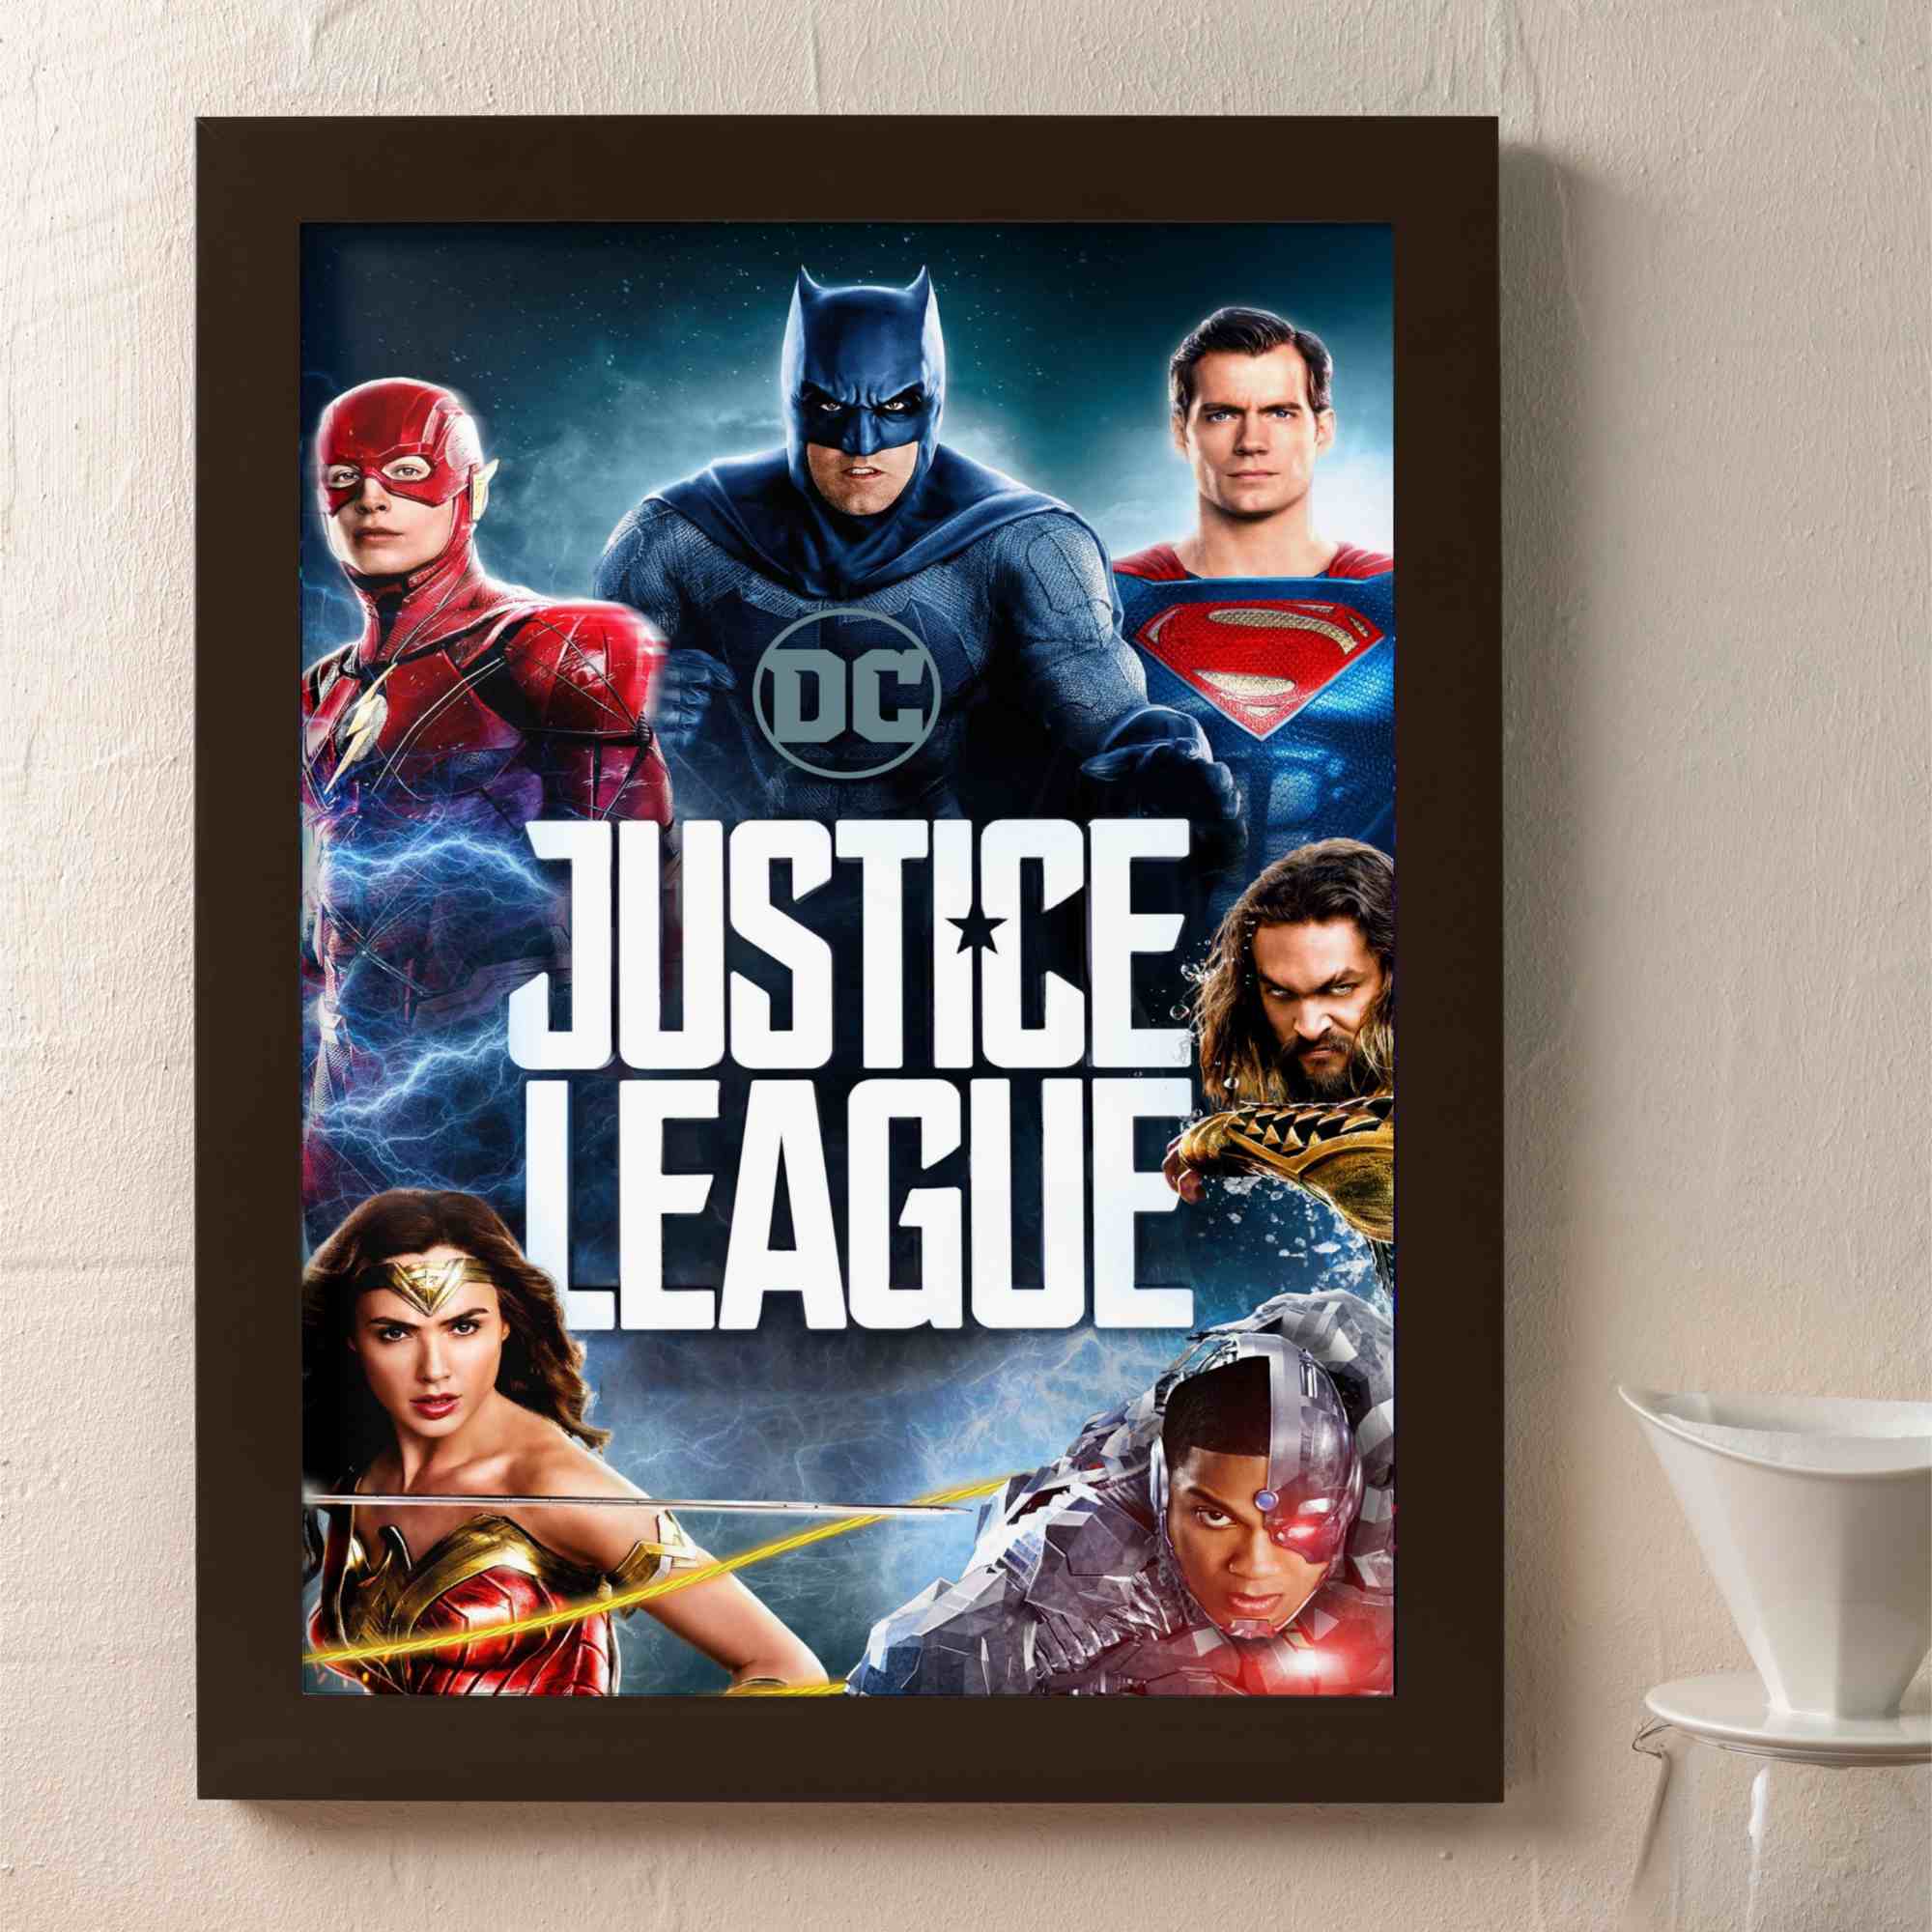 Justice league movie poster